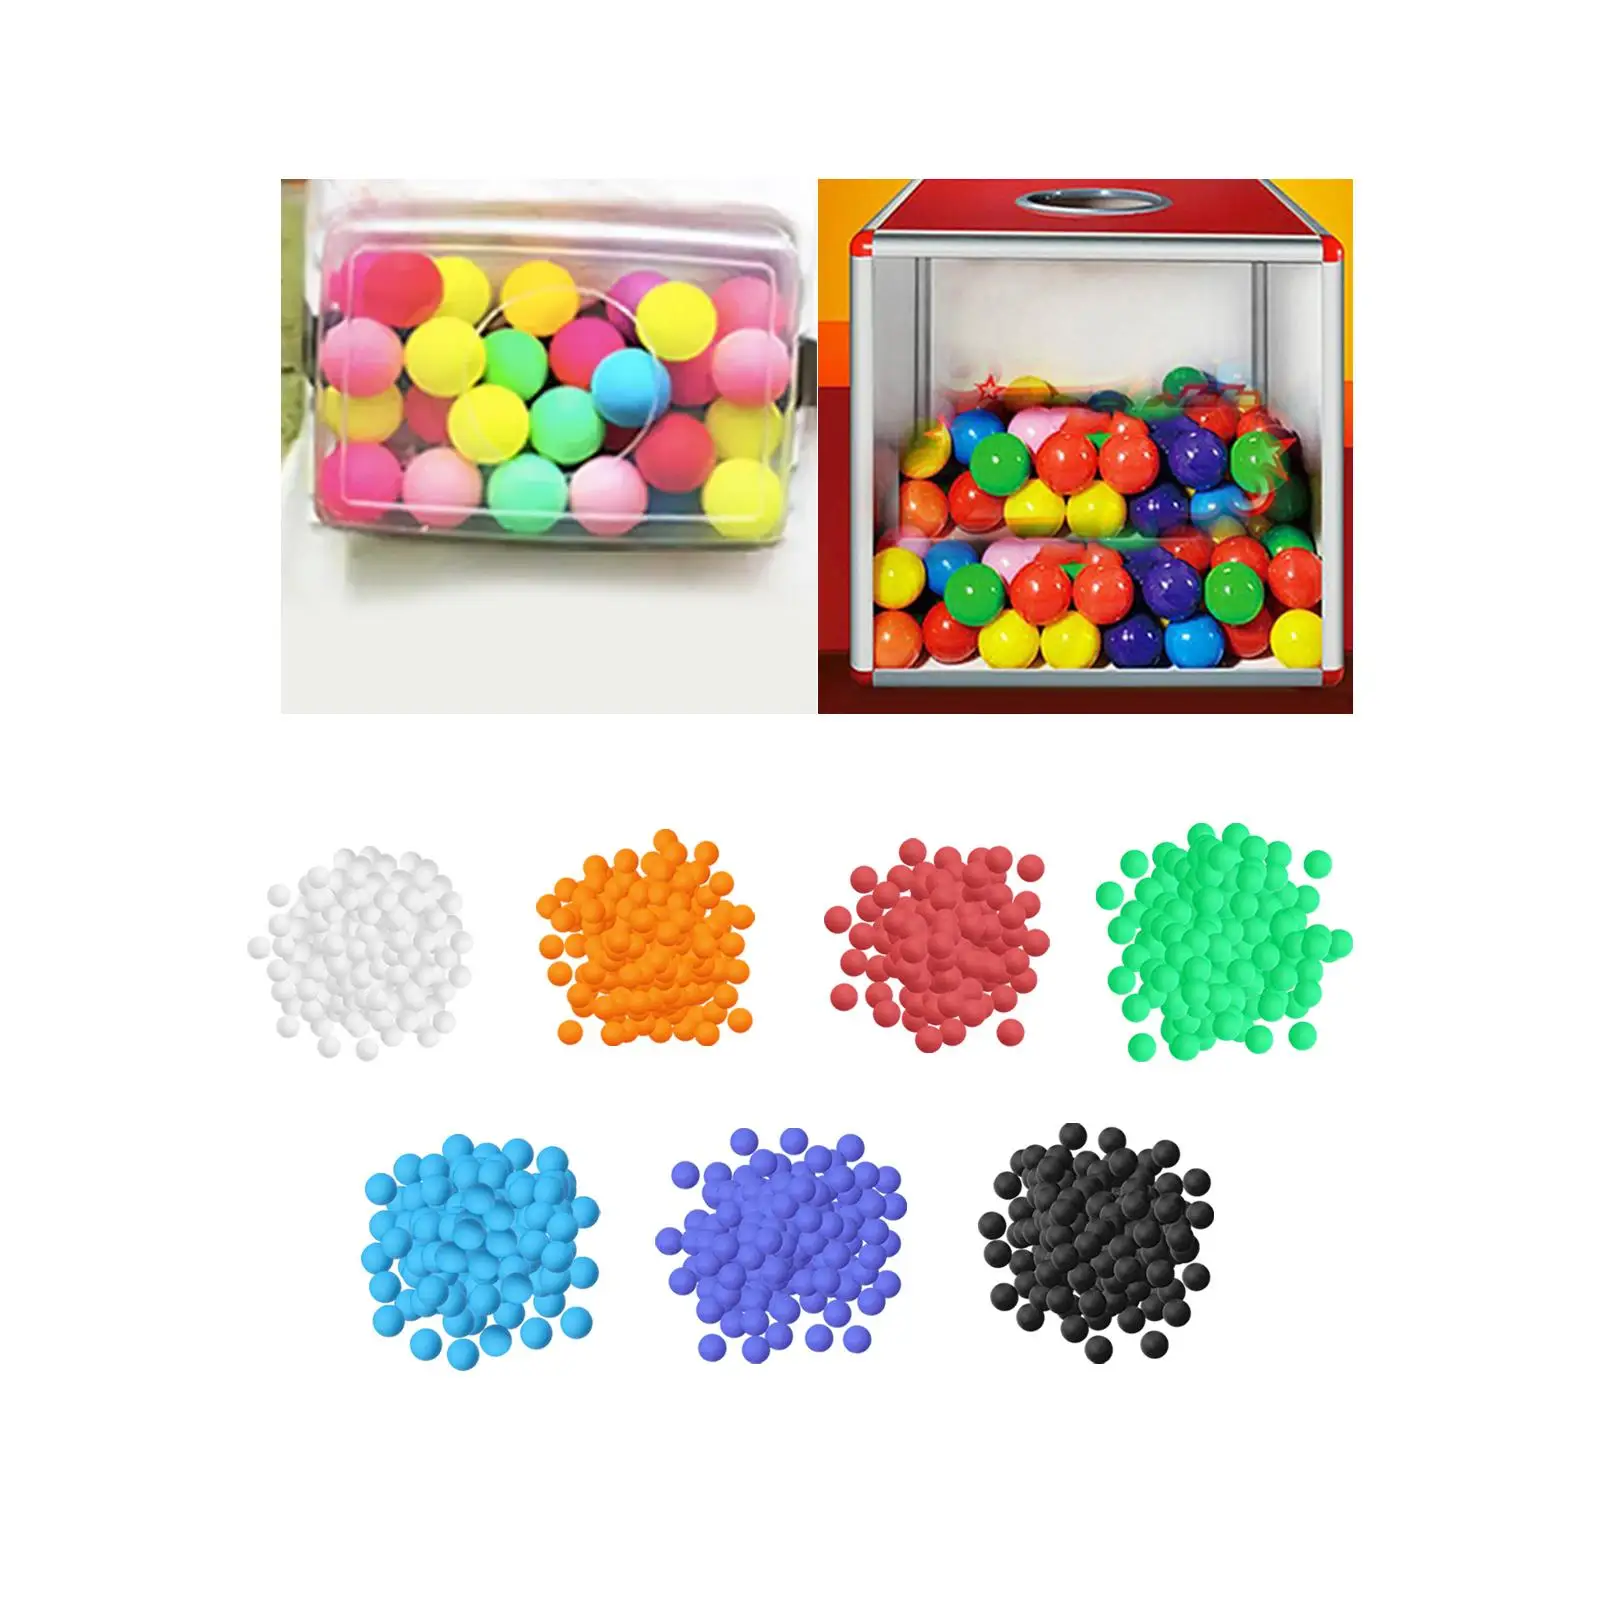 150Pcs Entertainment Table Tennis Balls Cat Toys Ping Pong Balls for Pool Games Activities Family Games Halloween School Games